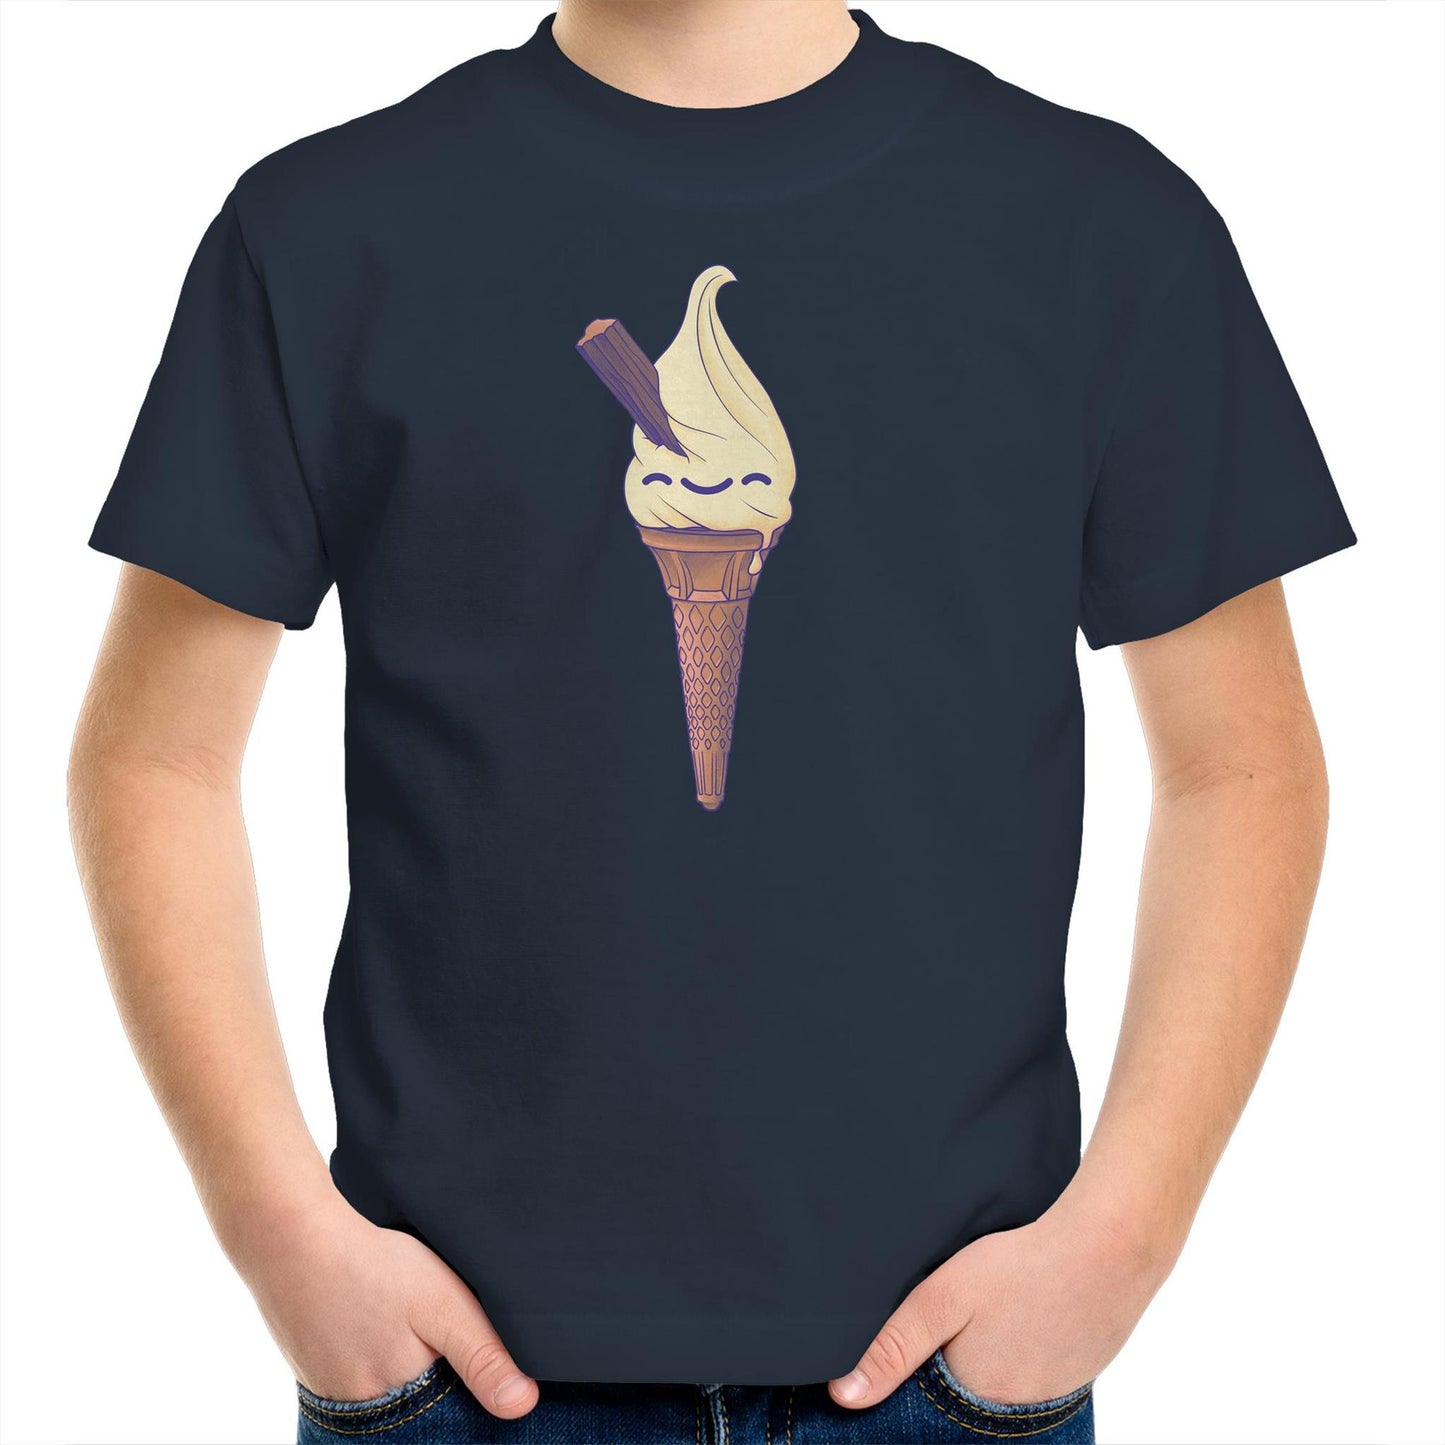 Hold the Cone - Kids Tee